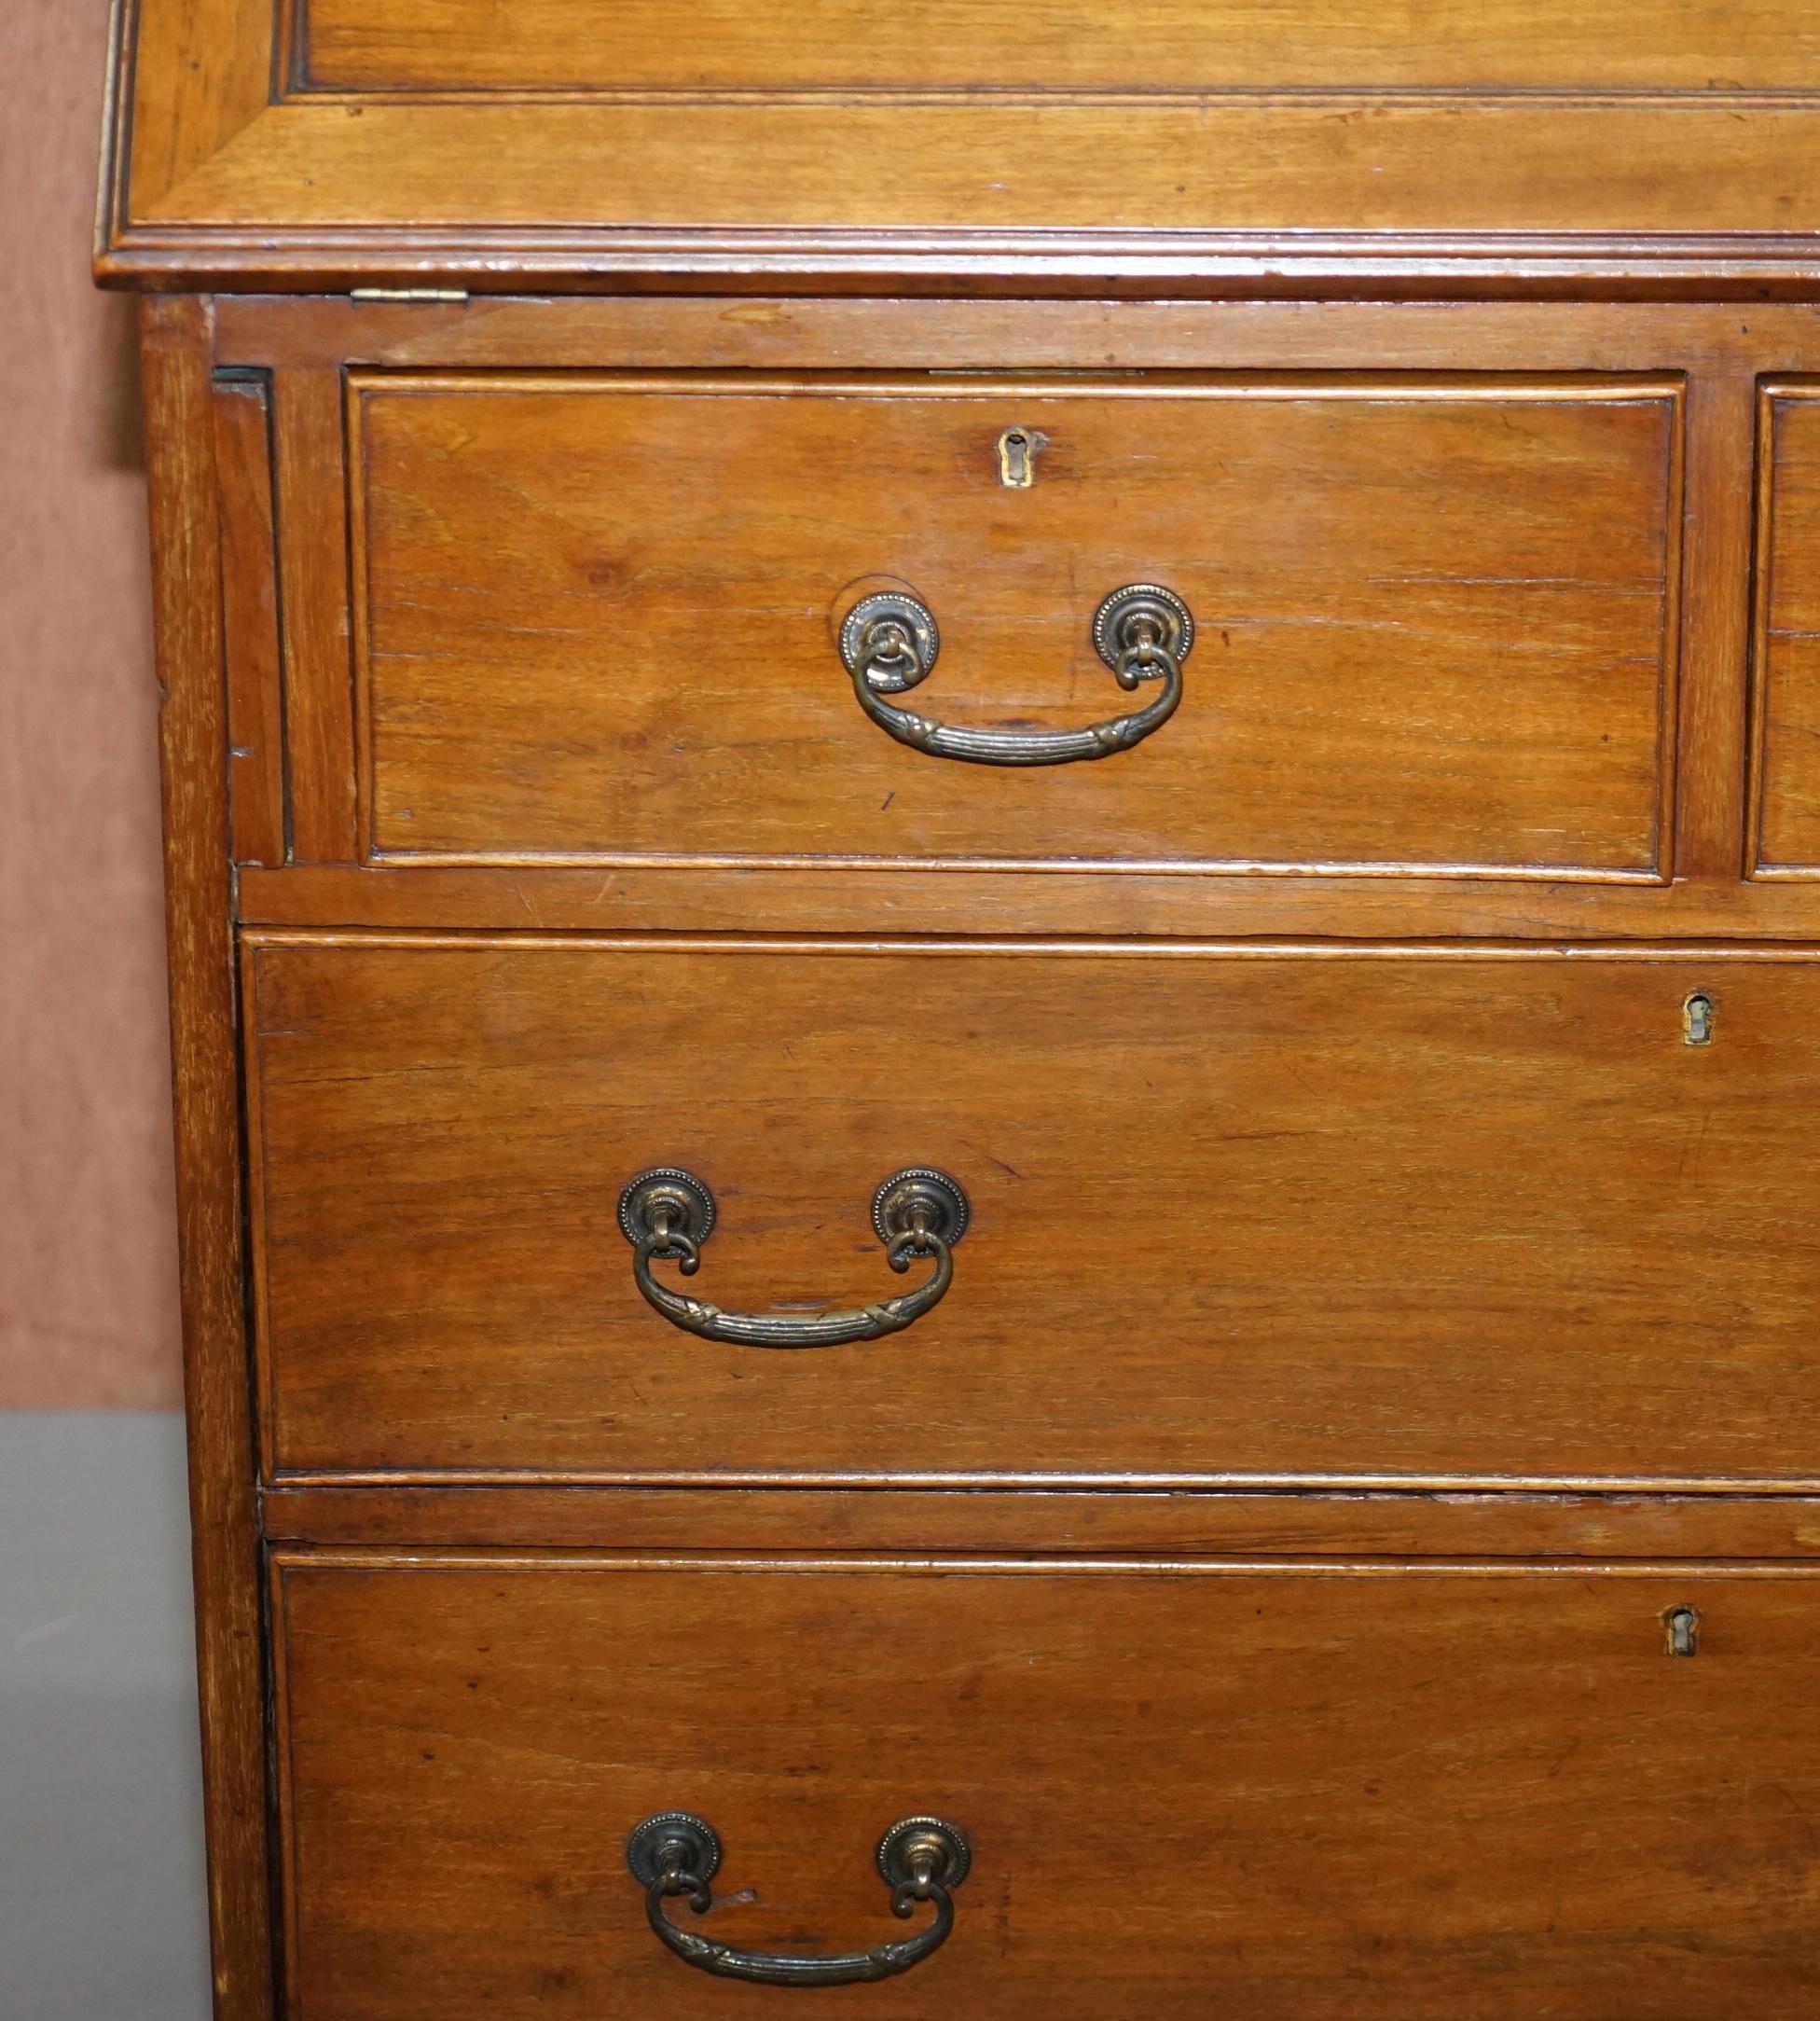 Lovely circa 1900 Solid Walnut Writing Bureau Chest of Drawers with Desk Top 2